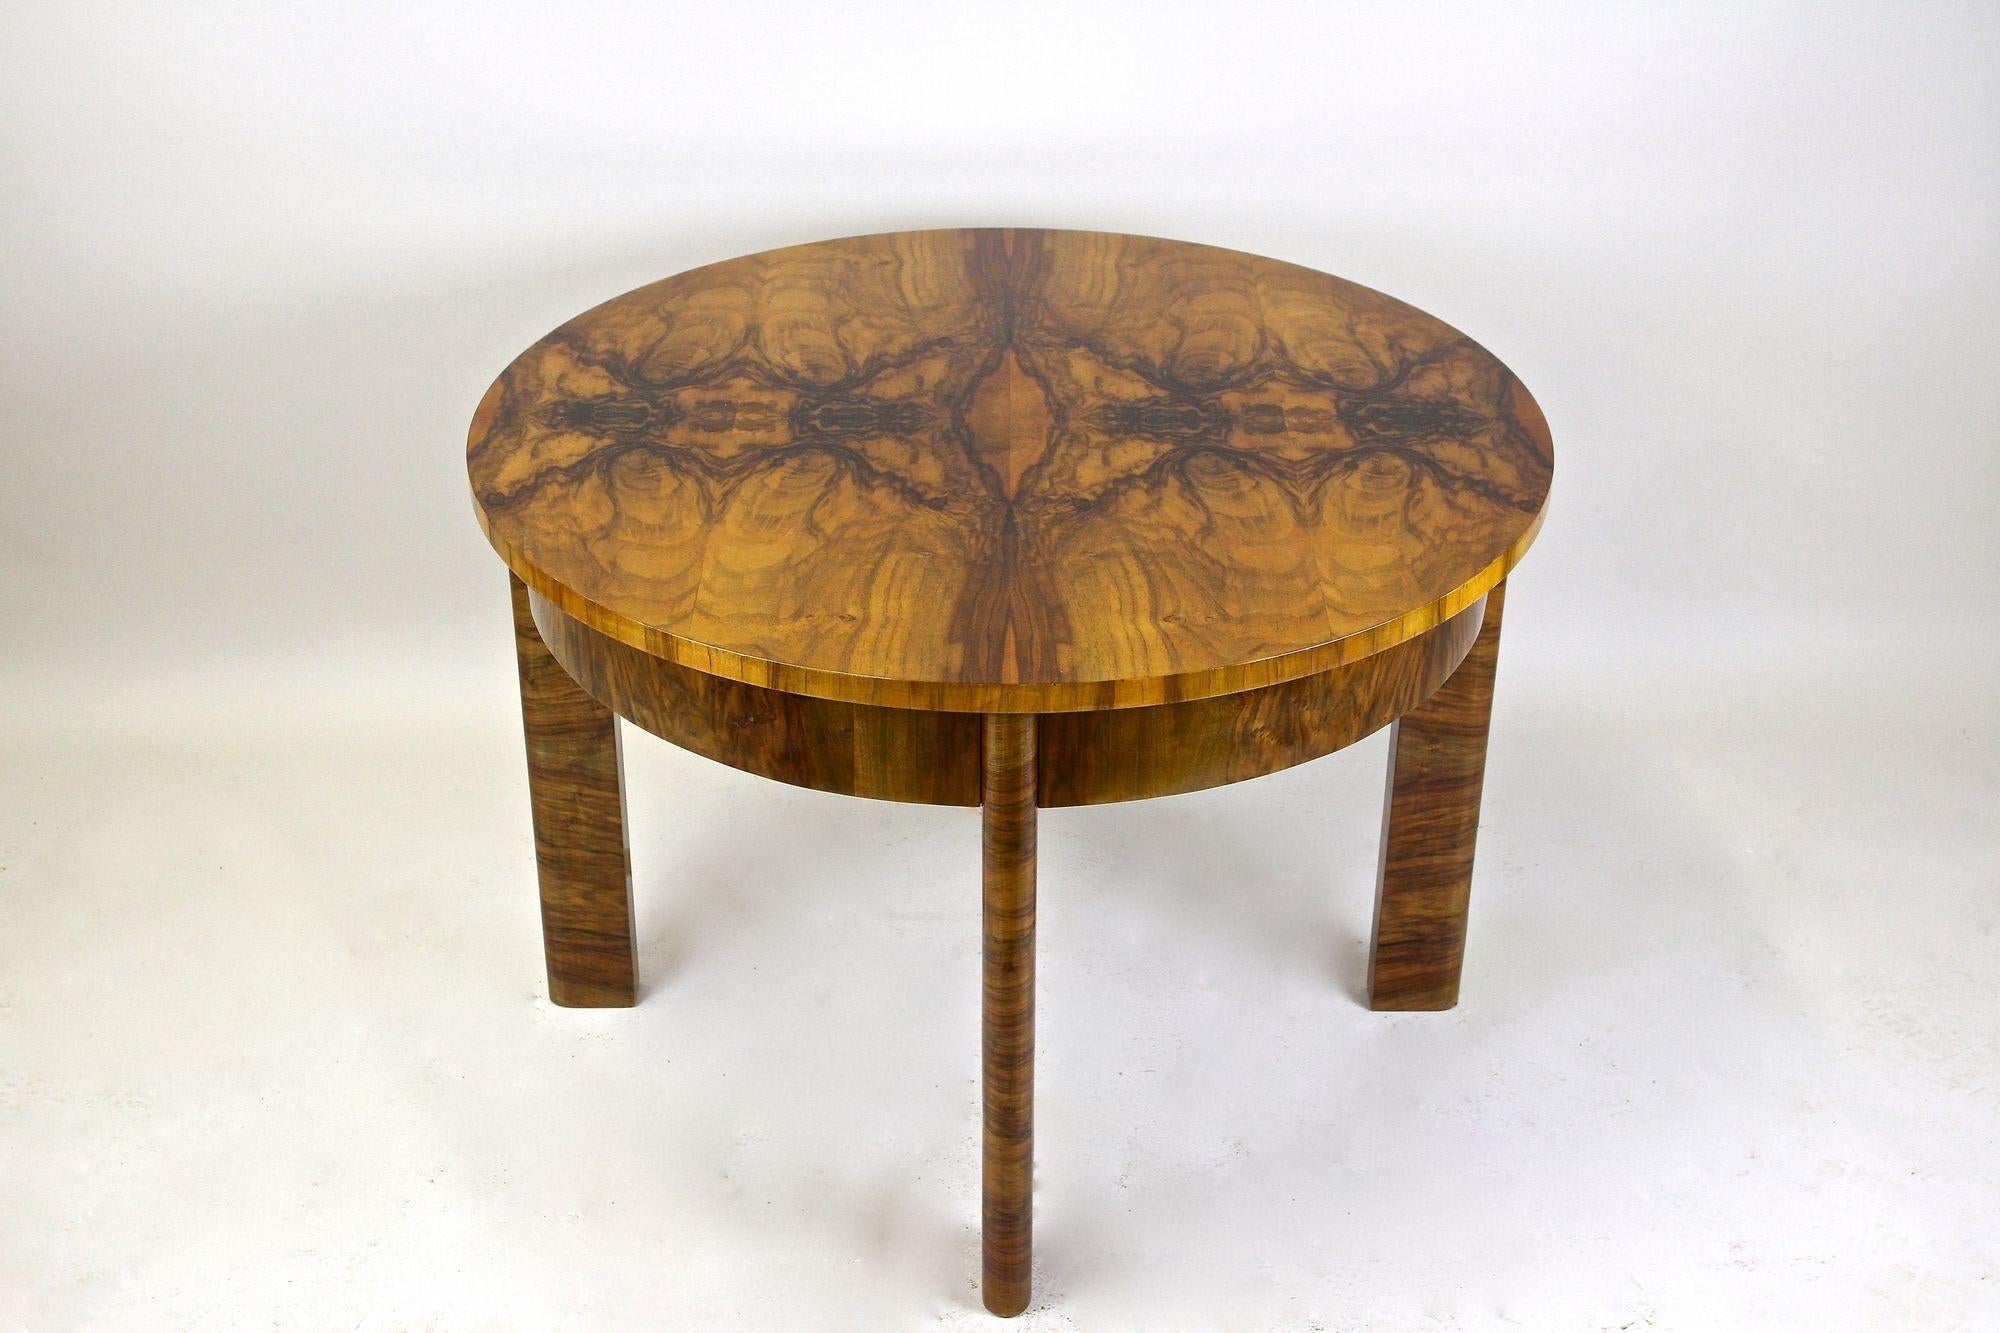 Art Deco Round Coffee Table/ Side Table Burr Walnut 20th Century, at, circa 1920 For Sale 3